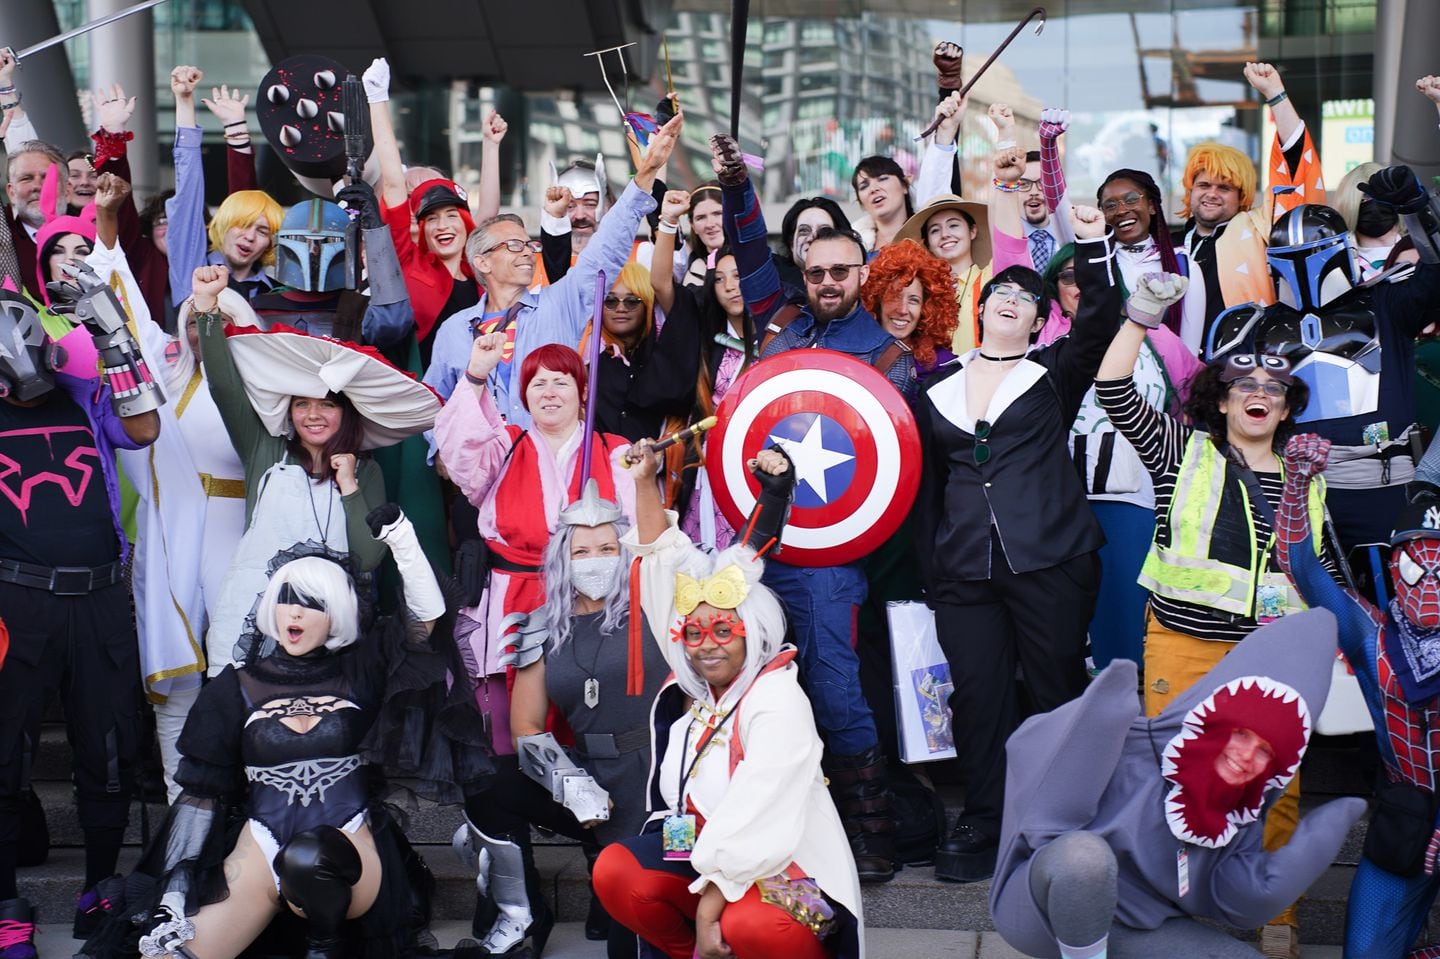 Cosplayers gather at Fan Expo Boston.